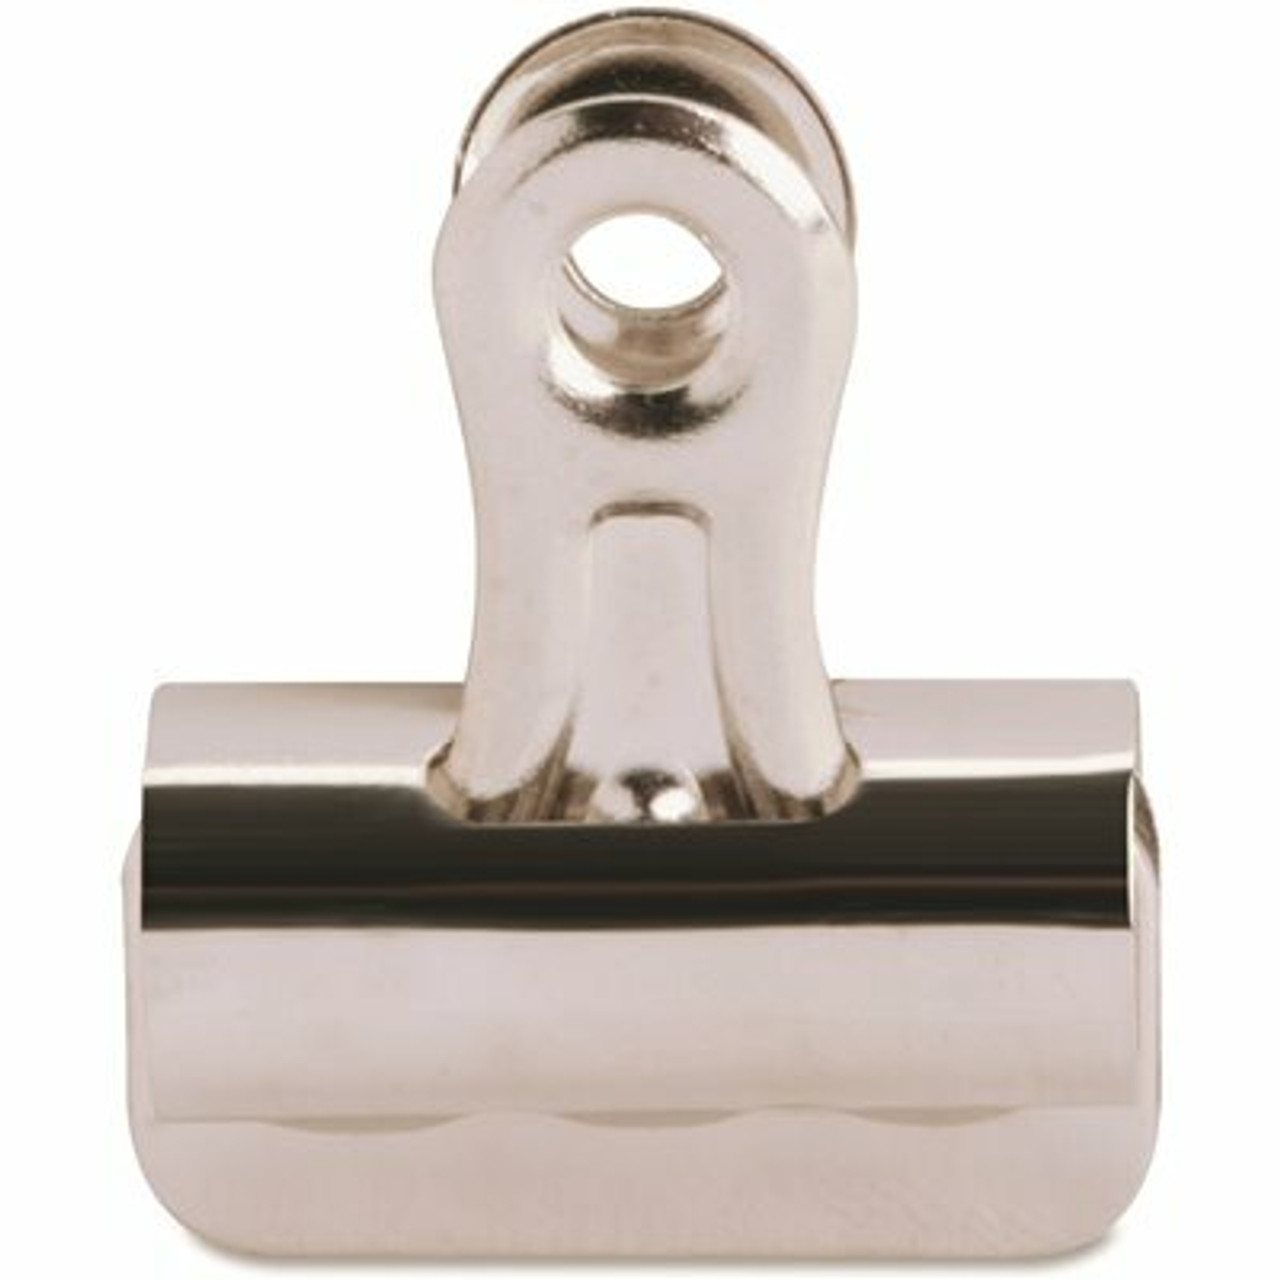 Business Source Number 1 Heavy-Duty Bulldog Grip Clips, Silver